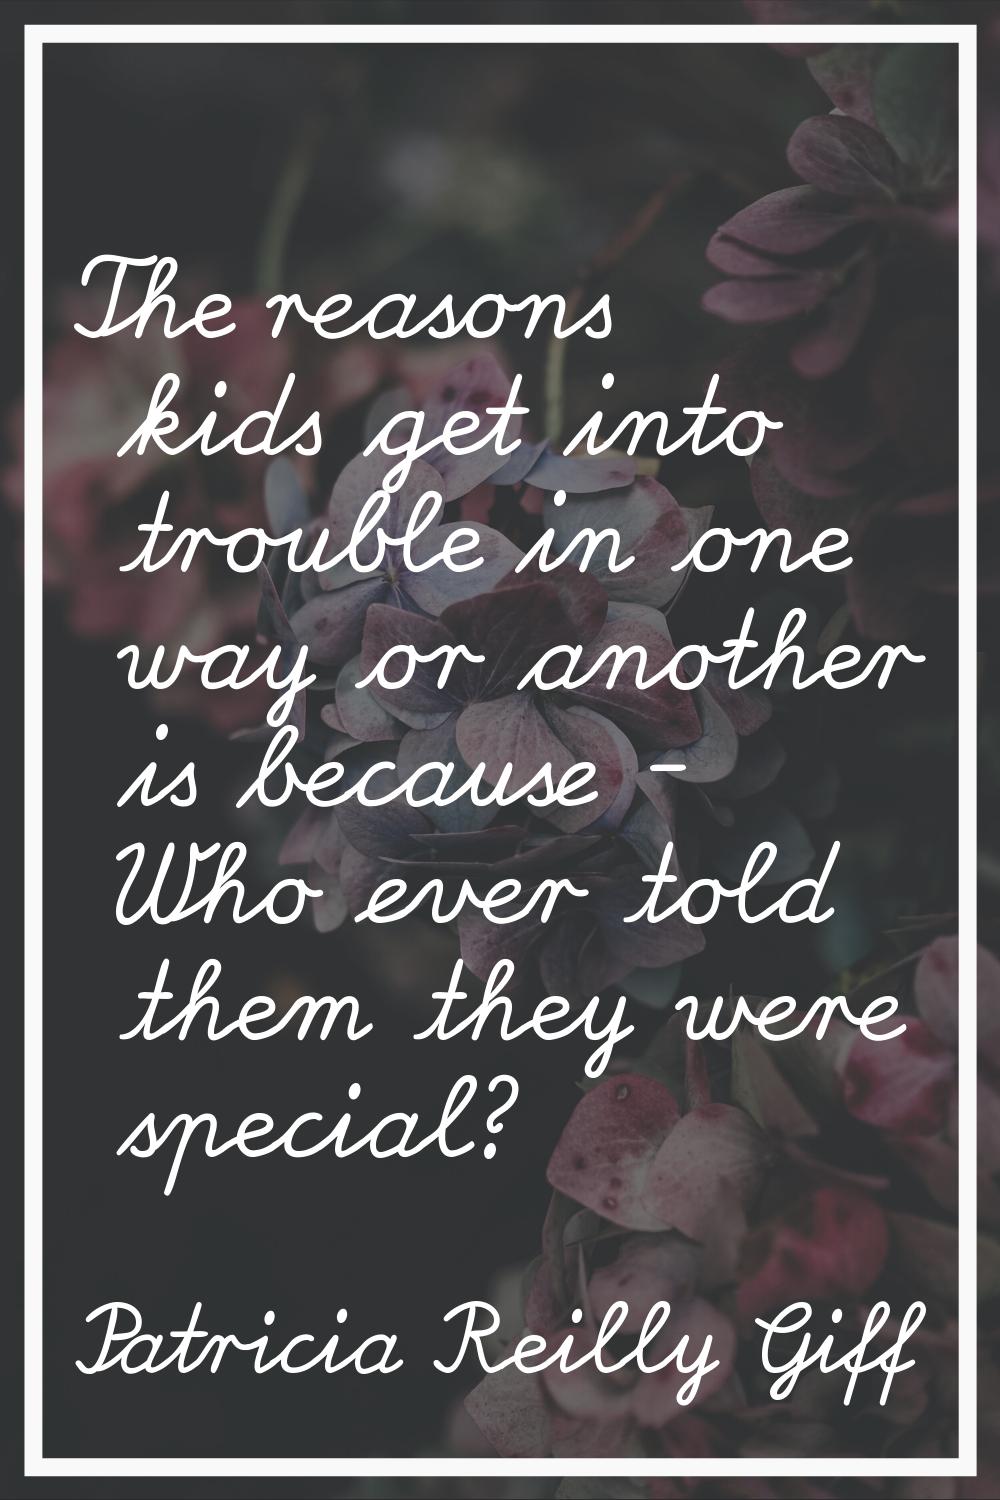 The reasons kids get into trouble in one way or another is because - Who ever told them they were s